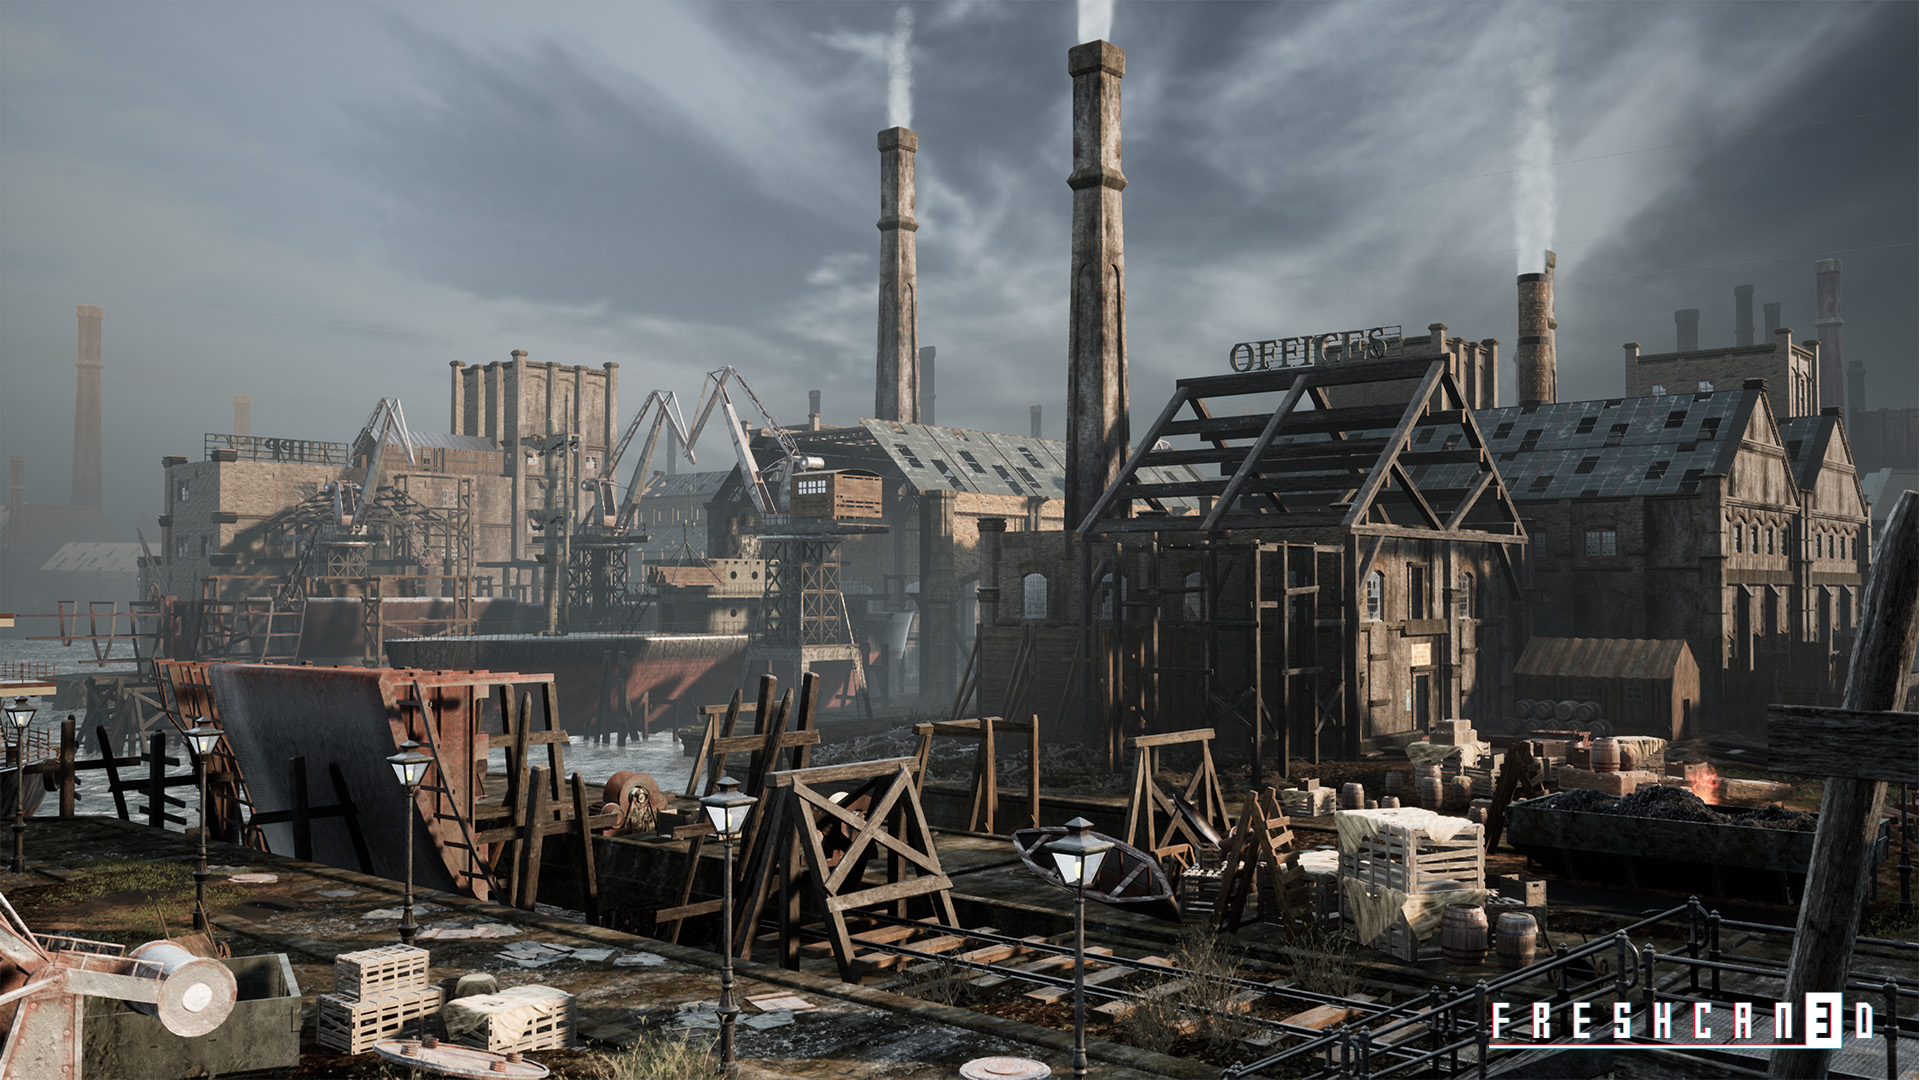 【UE4】旧工业城市工厂Old Industrial City and Shipyard with Factory Interiors